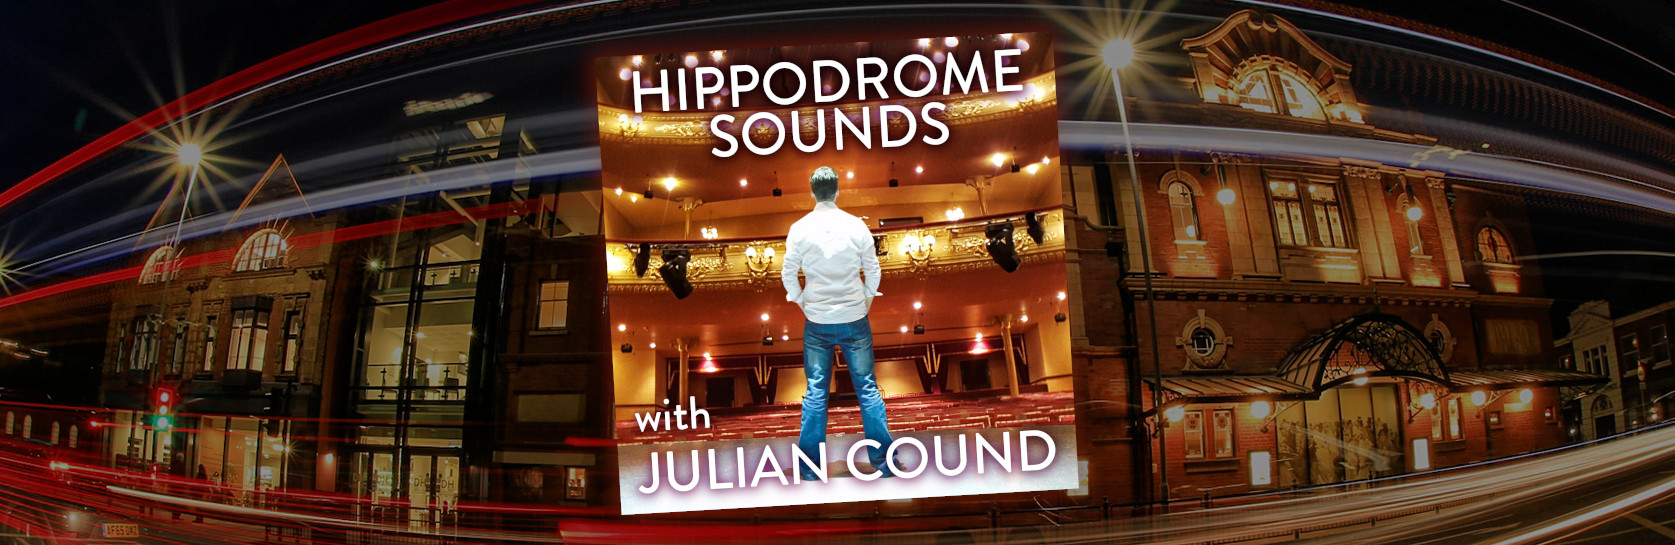 Hippodrome Sounds with Julian Cound - The Panto Edition